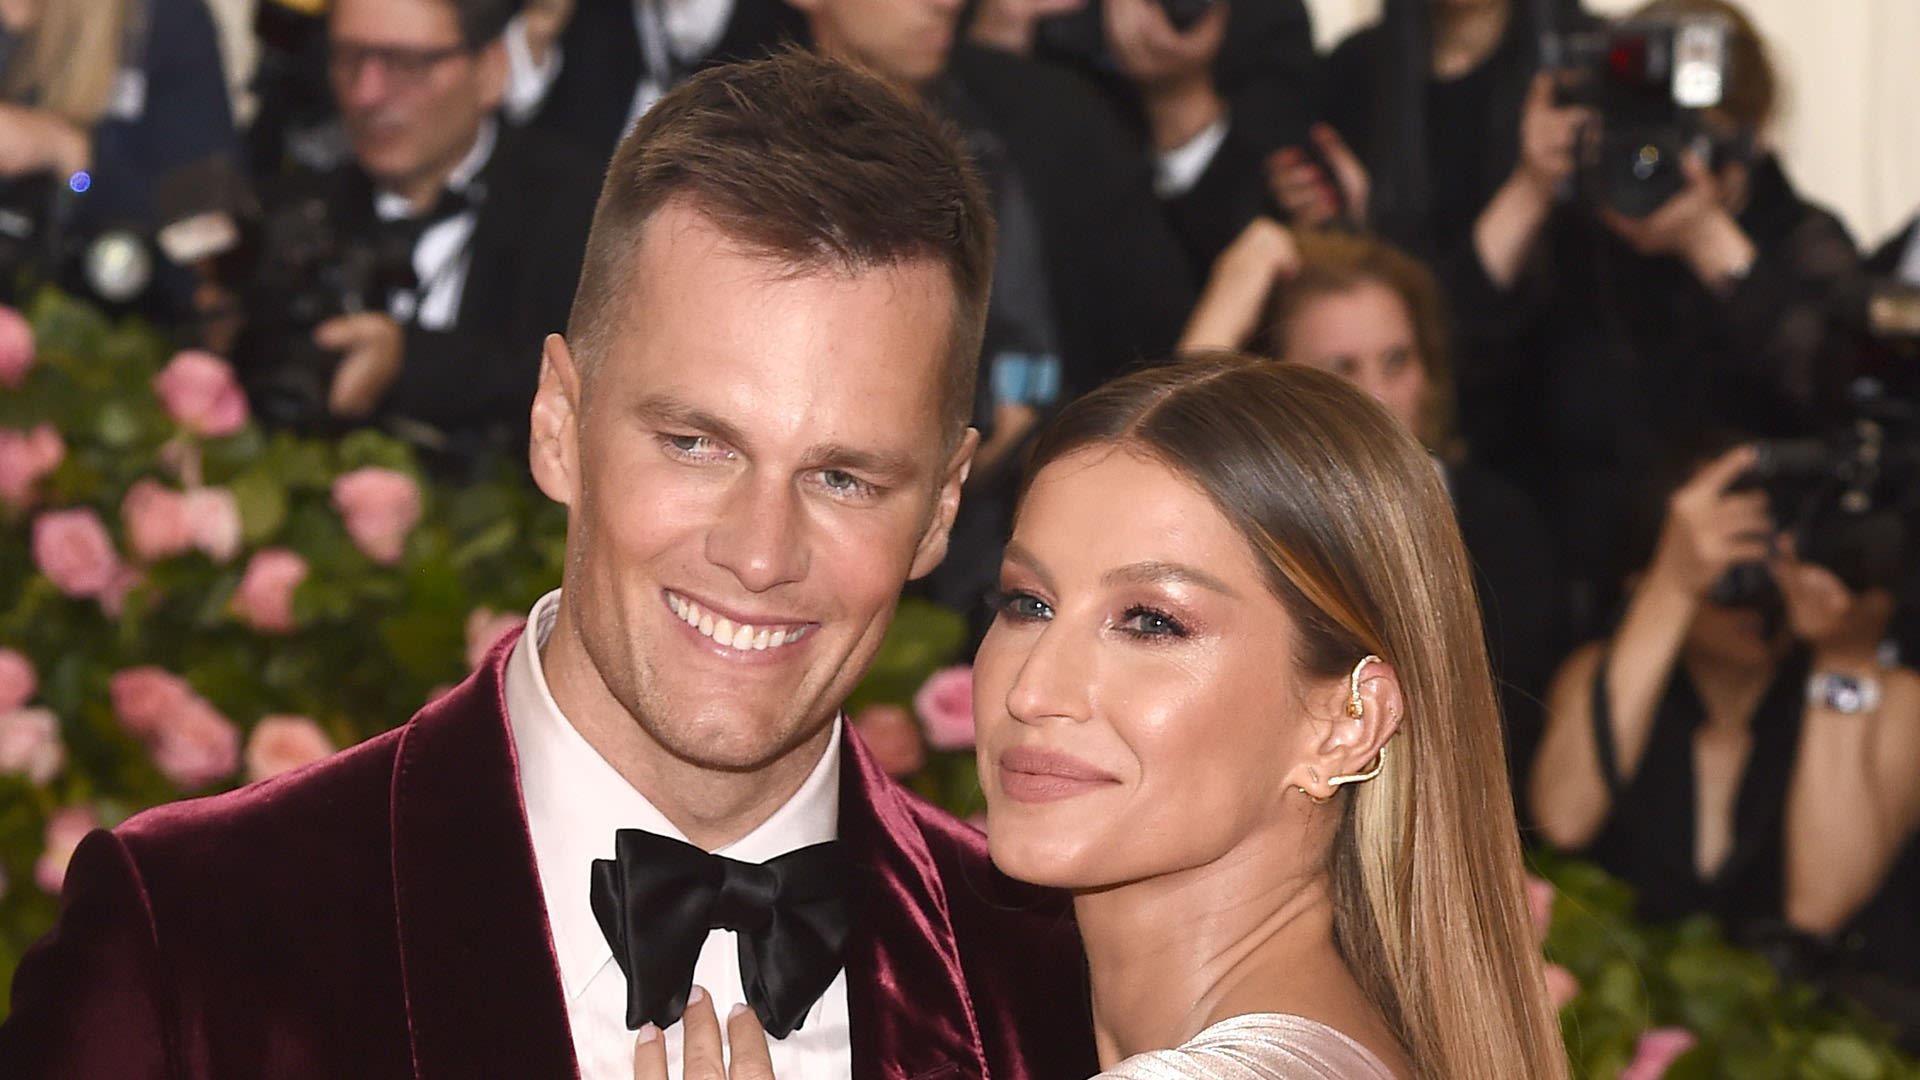 Brady pens emotional message to Gisele and more after Netflix roast controversy